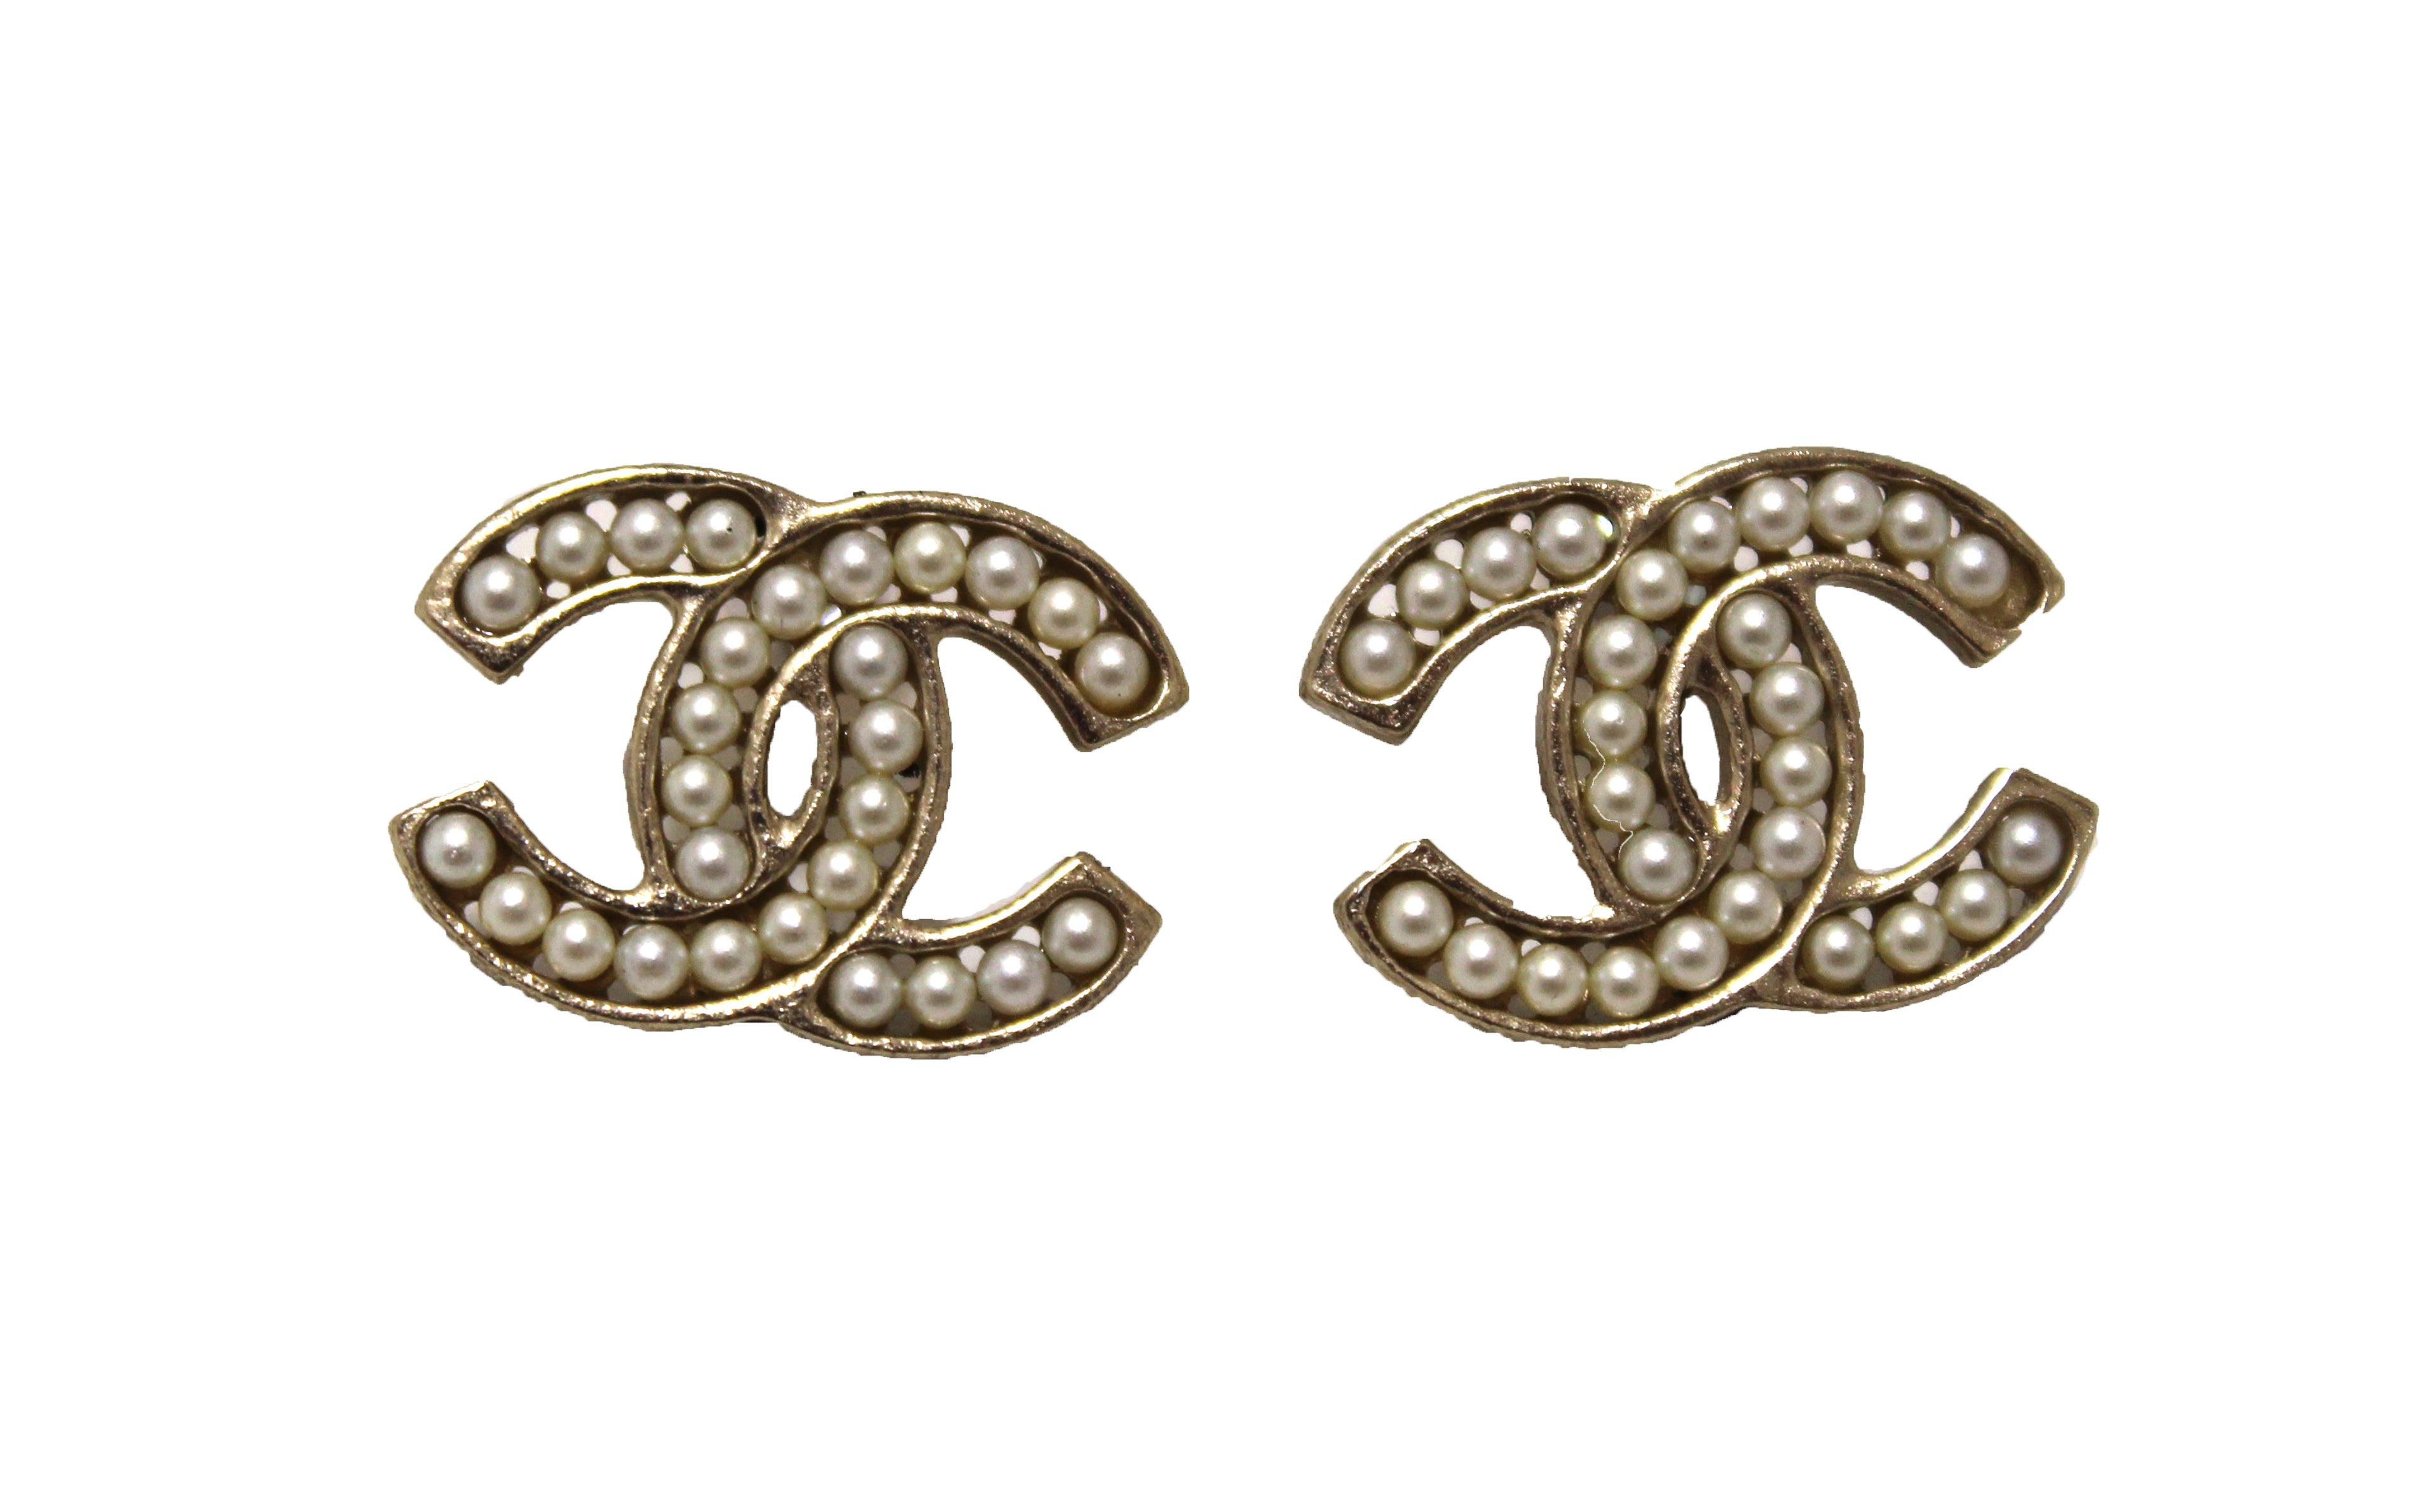 Chanel Classic Gold CC Thin Crystal Large Piercing Earrings